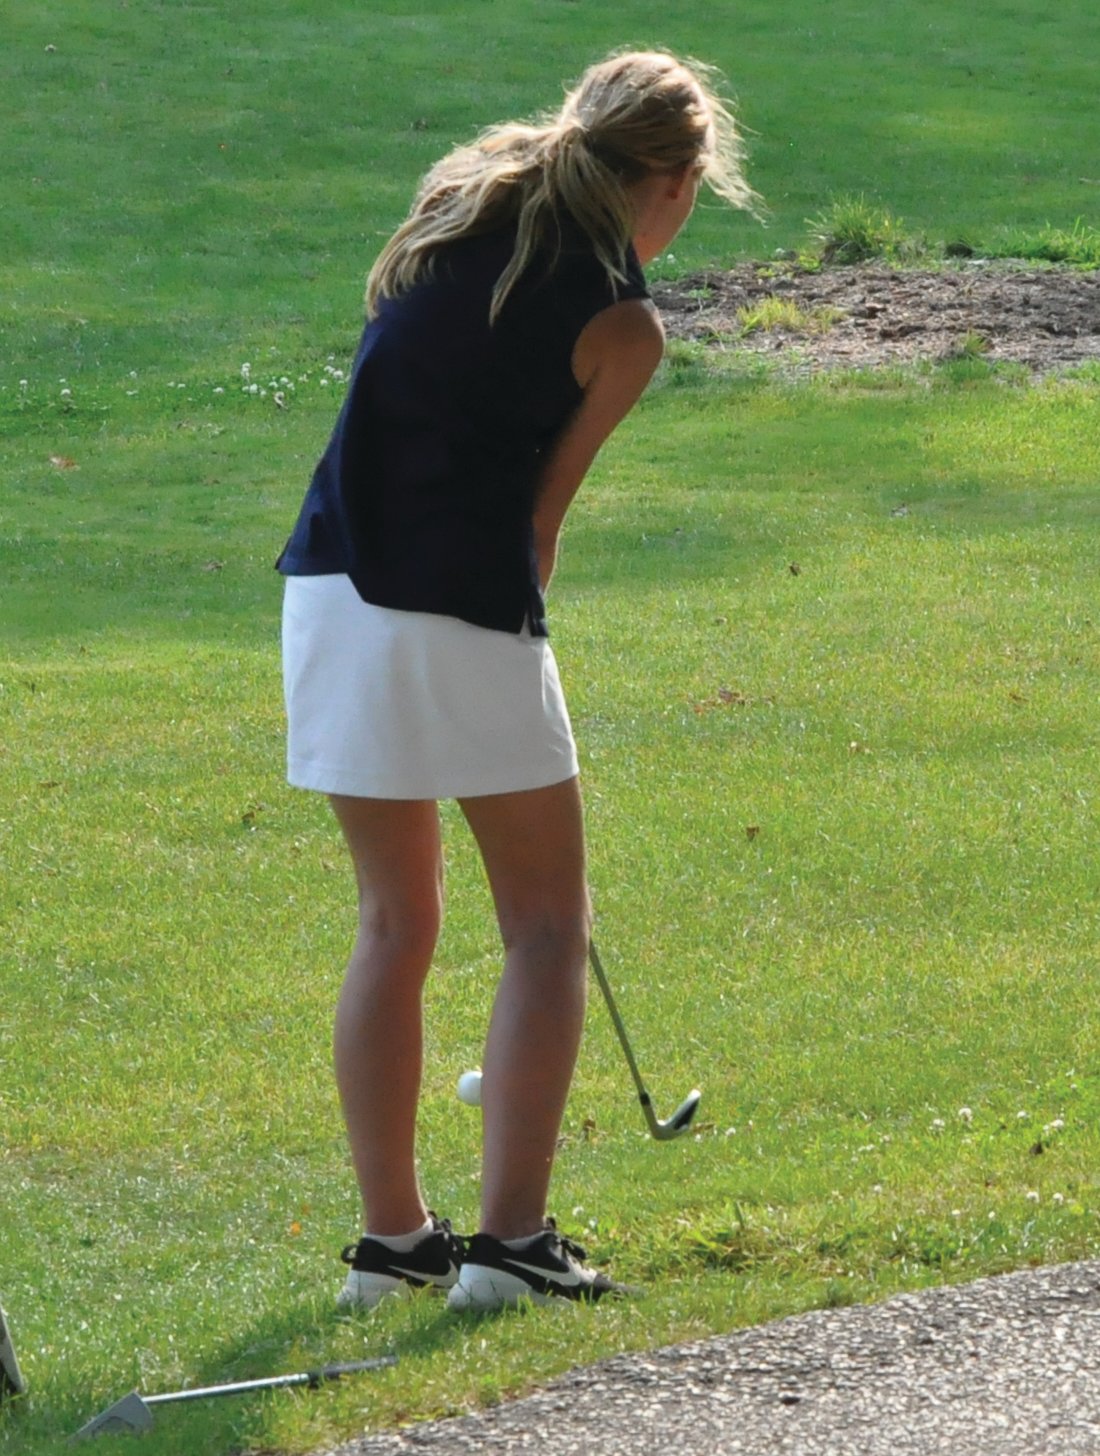 Shayna Ratcliff uses her pitching wedge on No. 3.